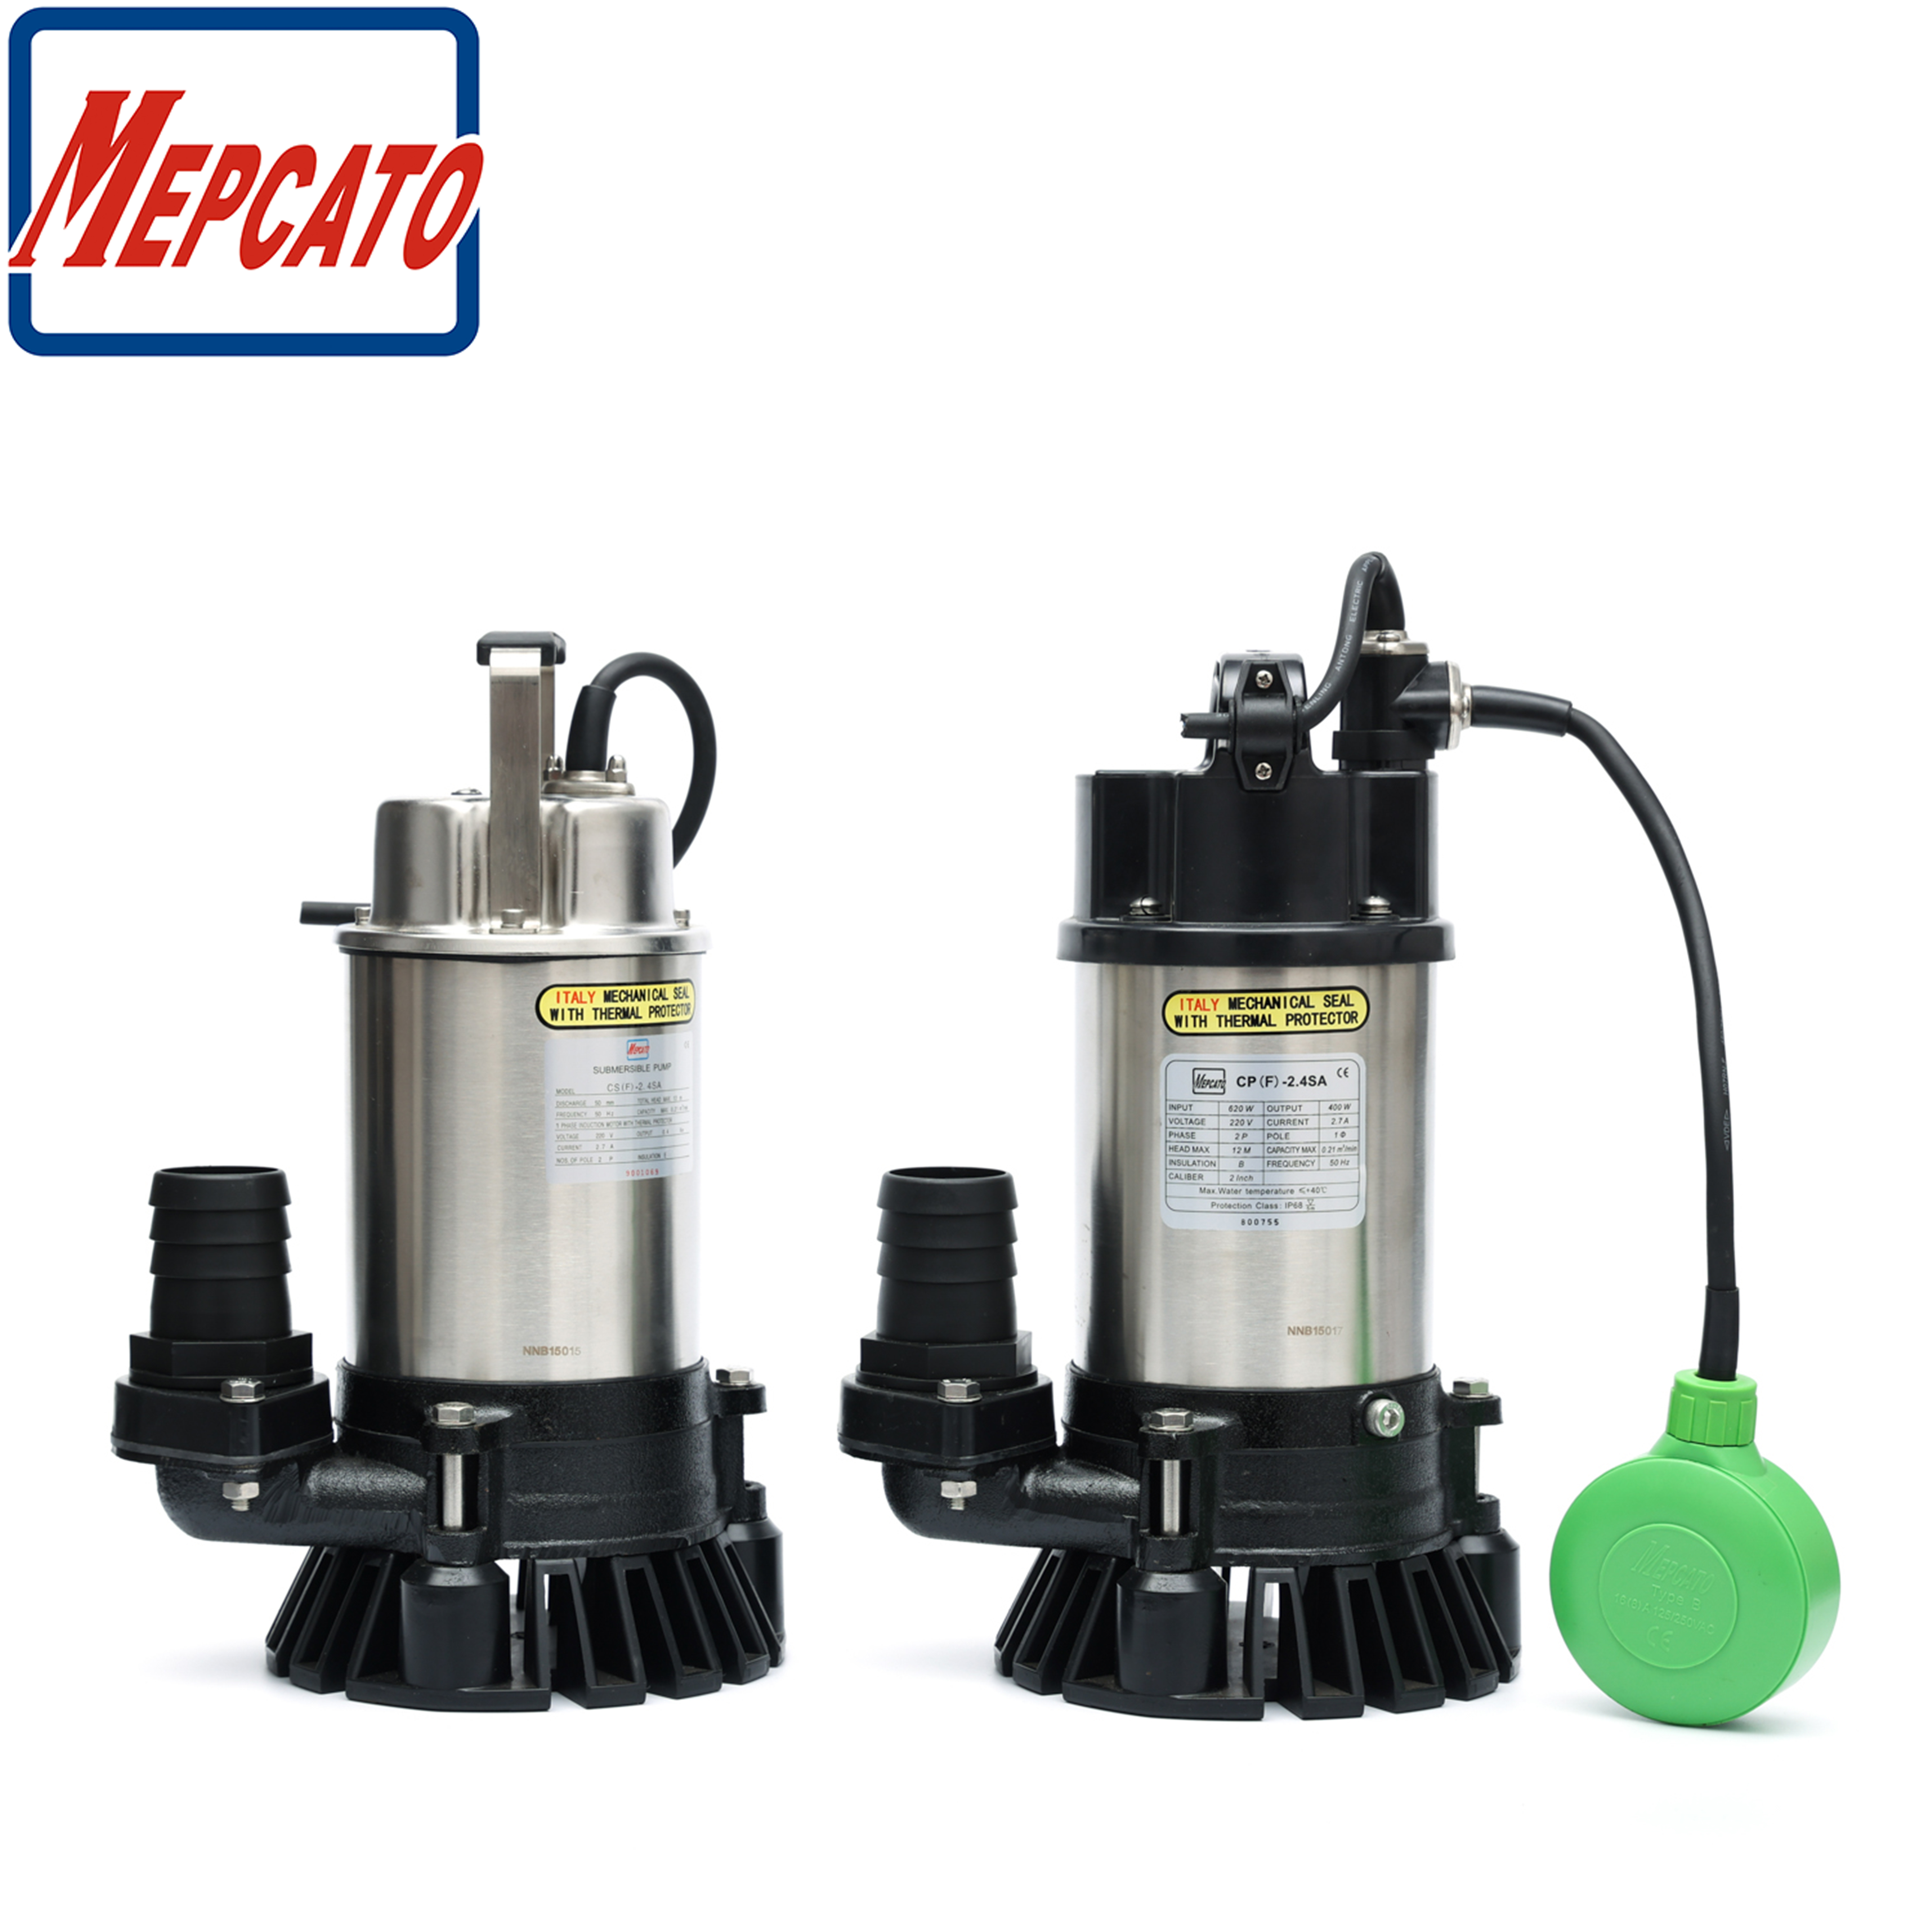 Wastewater Drainage Submersible Pump with Stirring Device